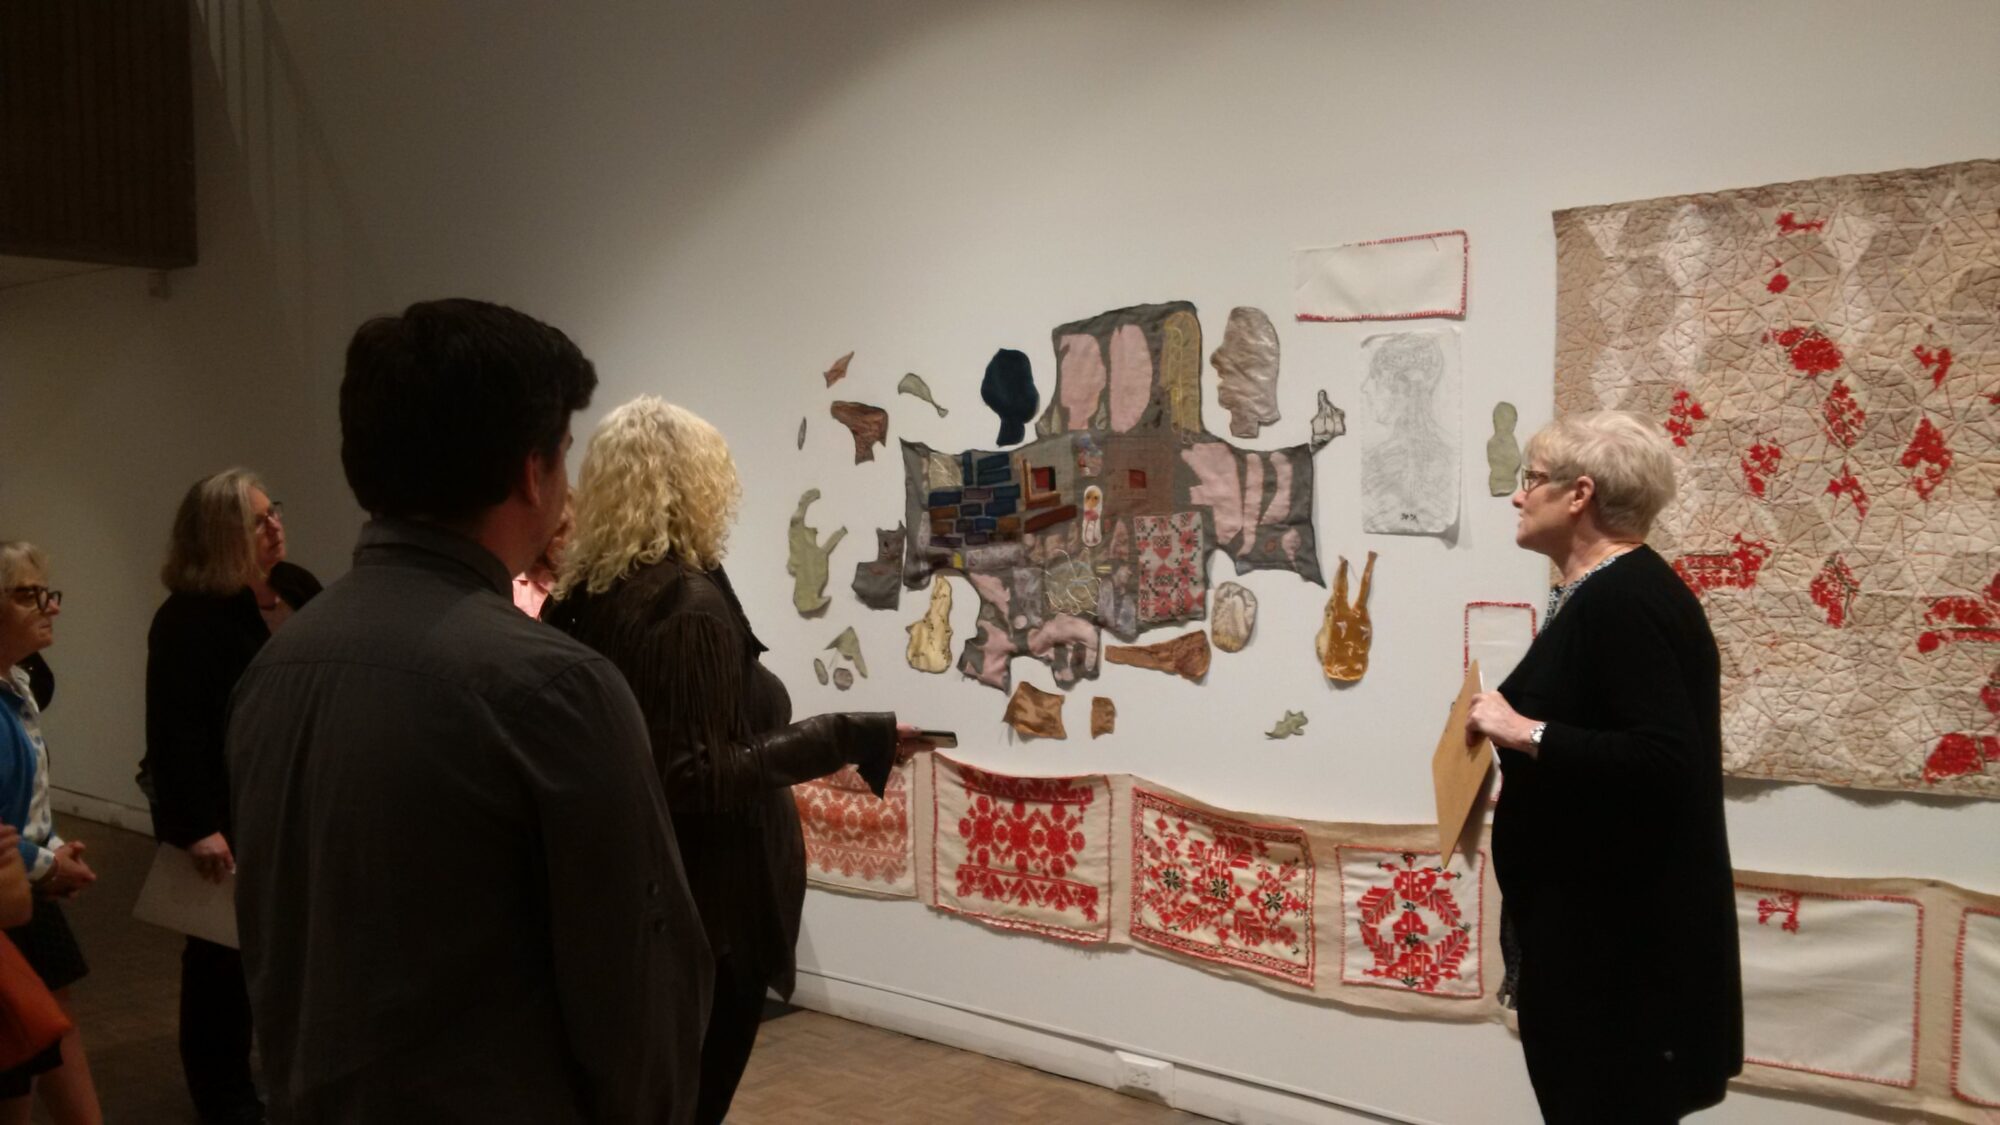 Gallery visitors looking at embroidered textiles hanging on a white wall.